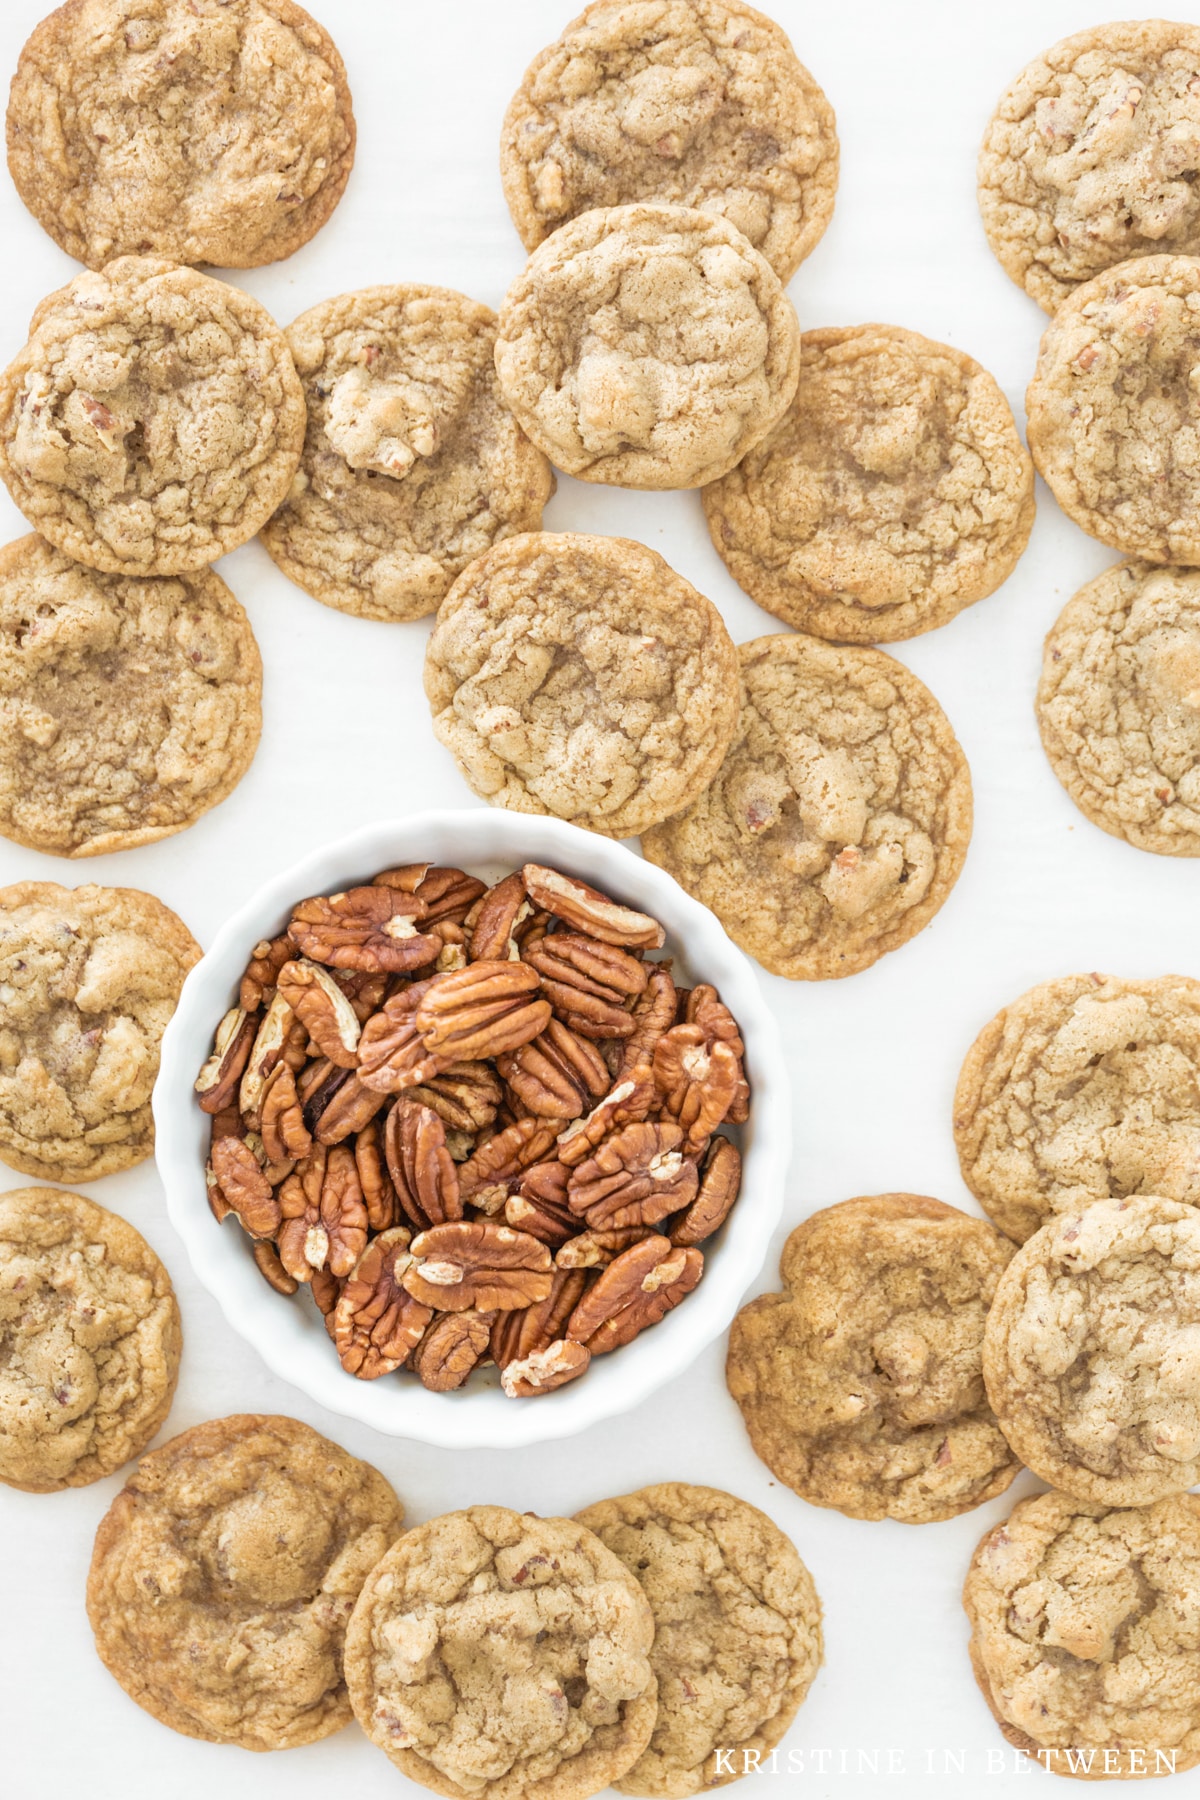 Cookies spread out on a baking sheet with a small bowl of pecans.